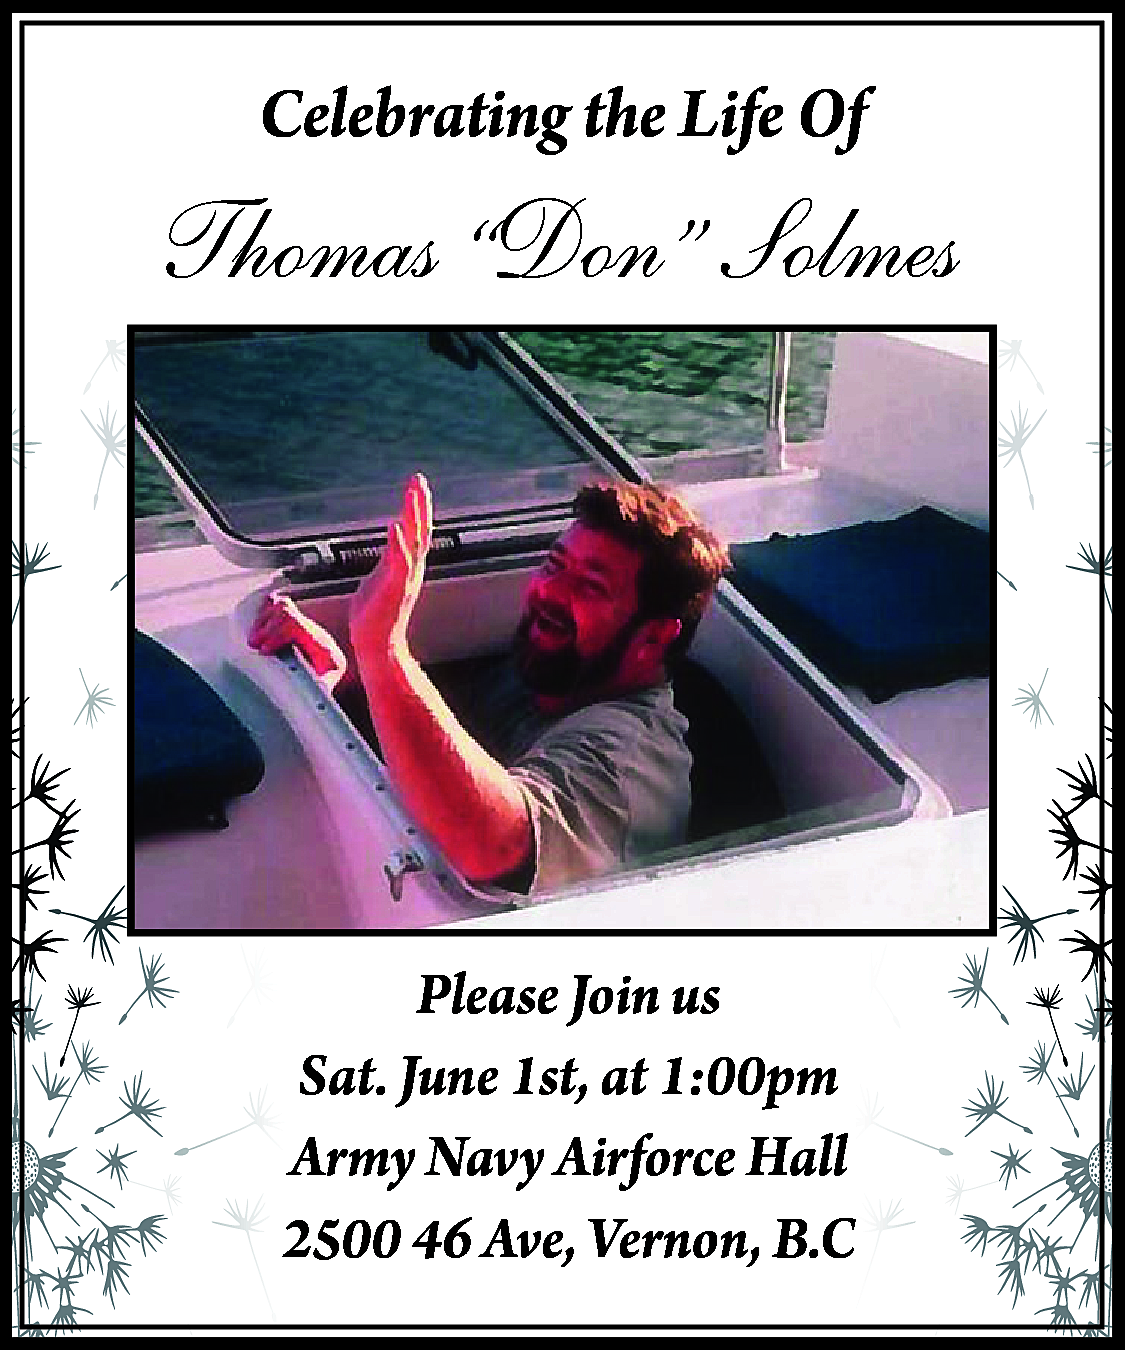 Celebrating the Life Of <br>  Celebrating the Life Of    Thomas “Don” Solmes    Please Join us  Sat. June 1st, at 1:00pm  Army Navy Airforce Hall  2500 46 Ave, Vernon, B.C    